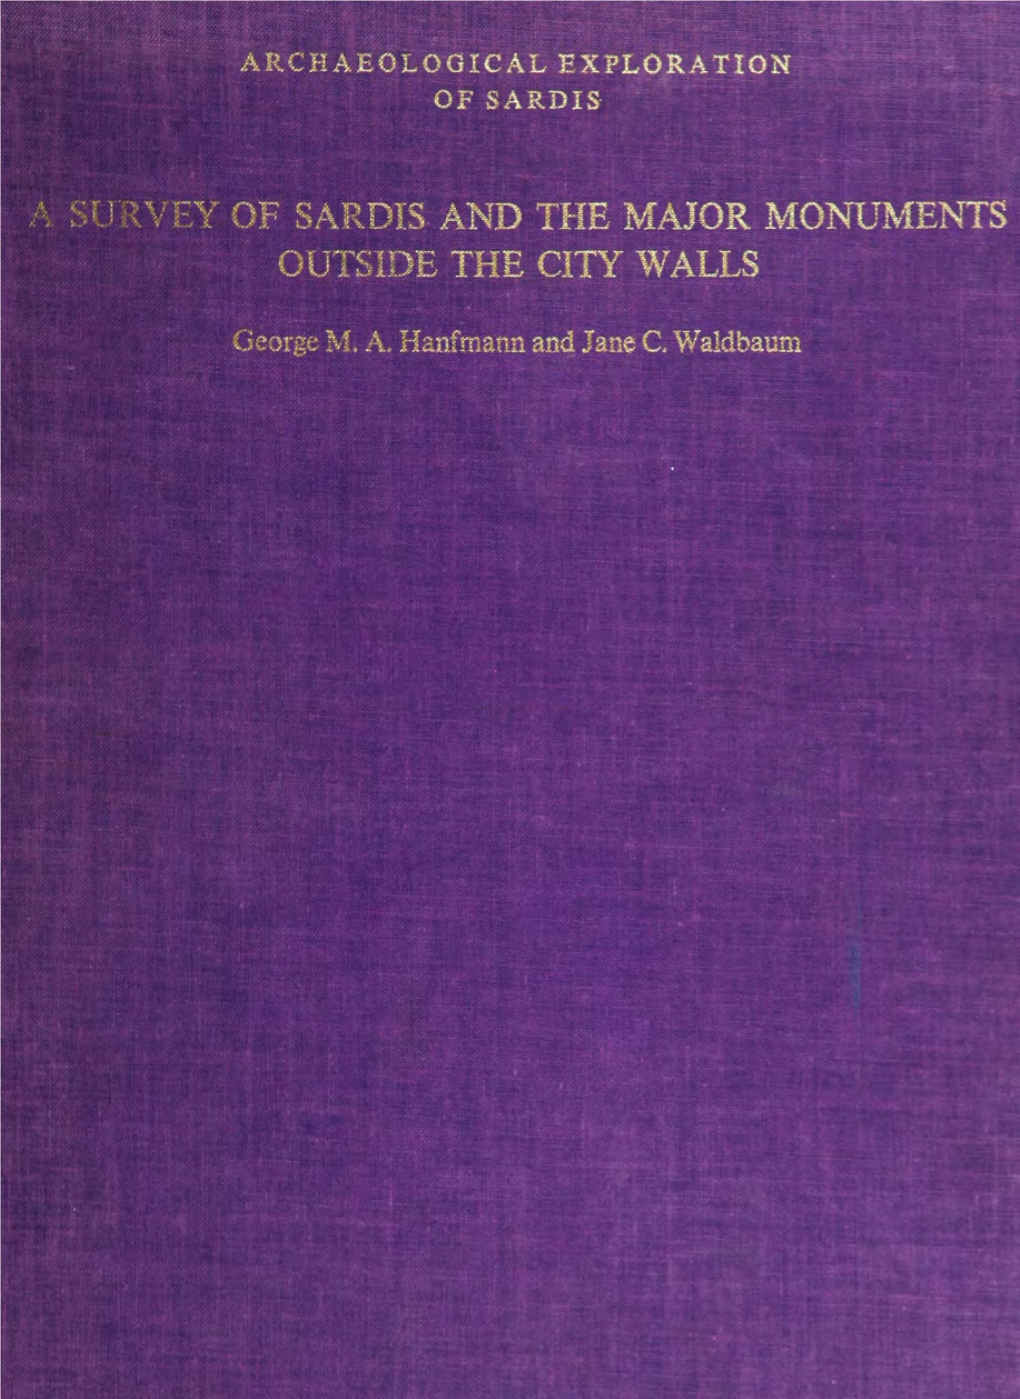 A Survey of Sardis and the Major Monuments Outside the City Walls